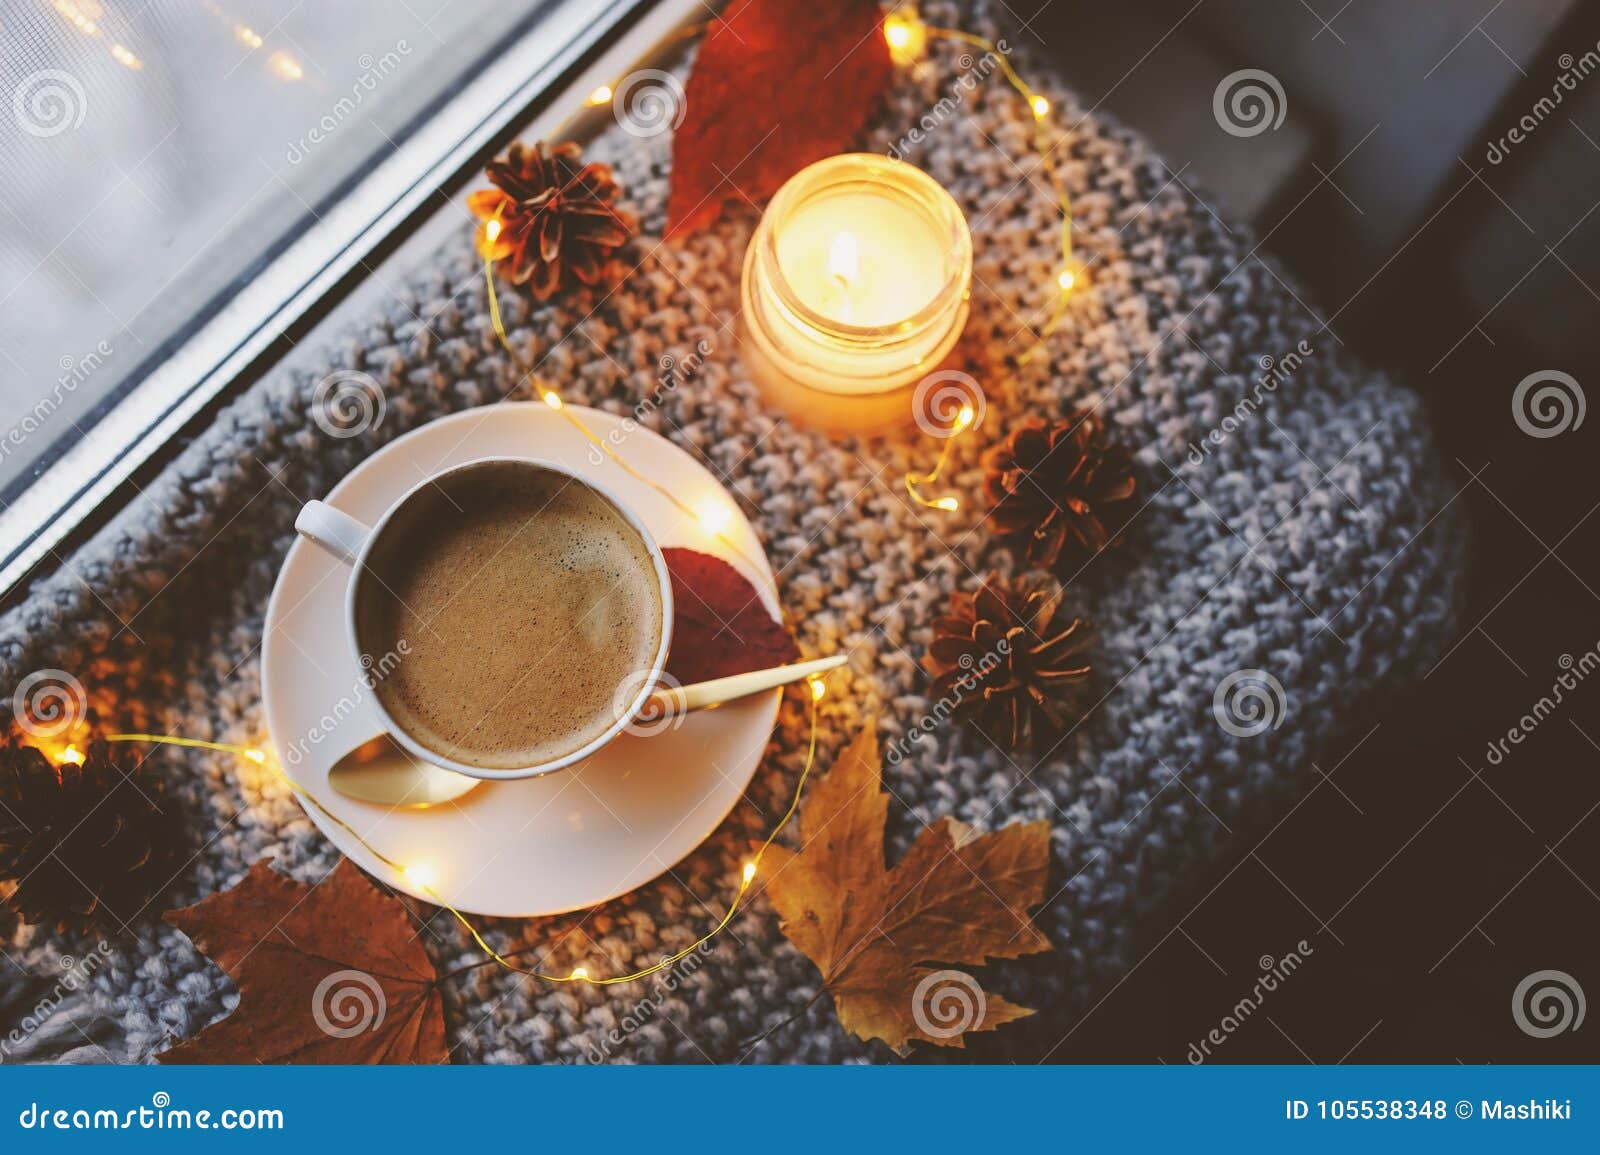 cozy winter or autumn morning at home. hot coffee with gold metallic spoon, warm blanket, garland and candle lights